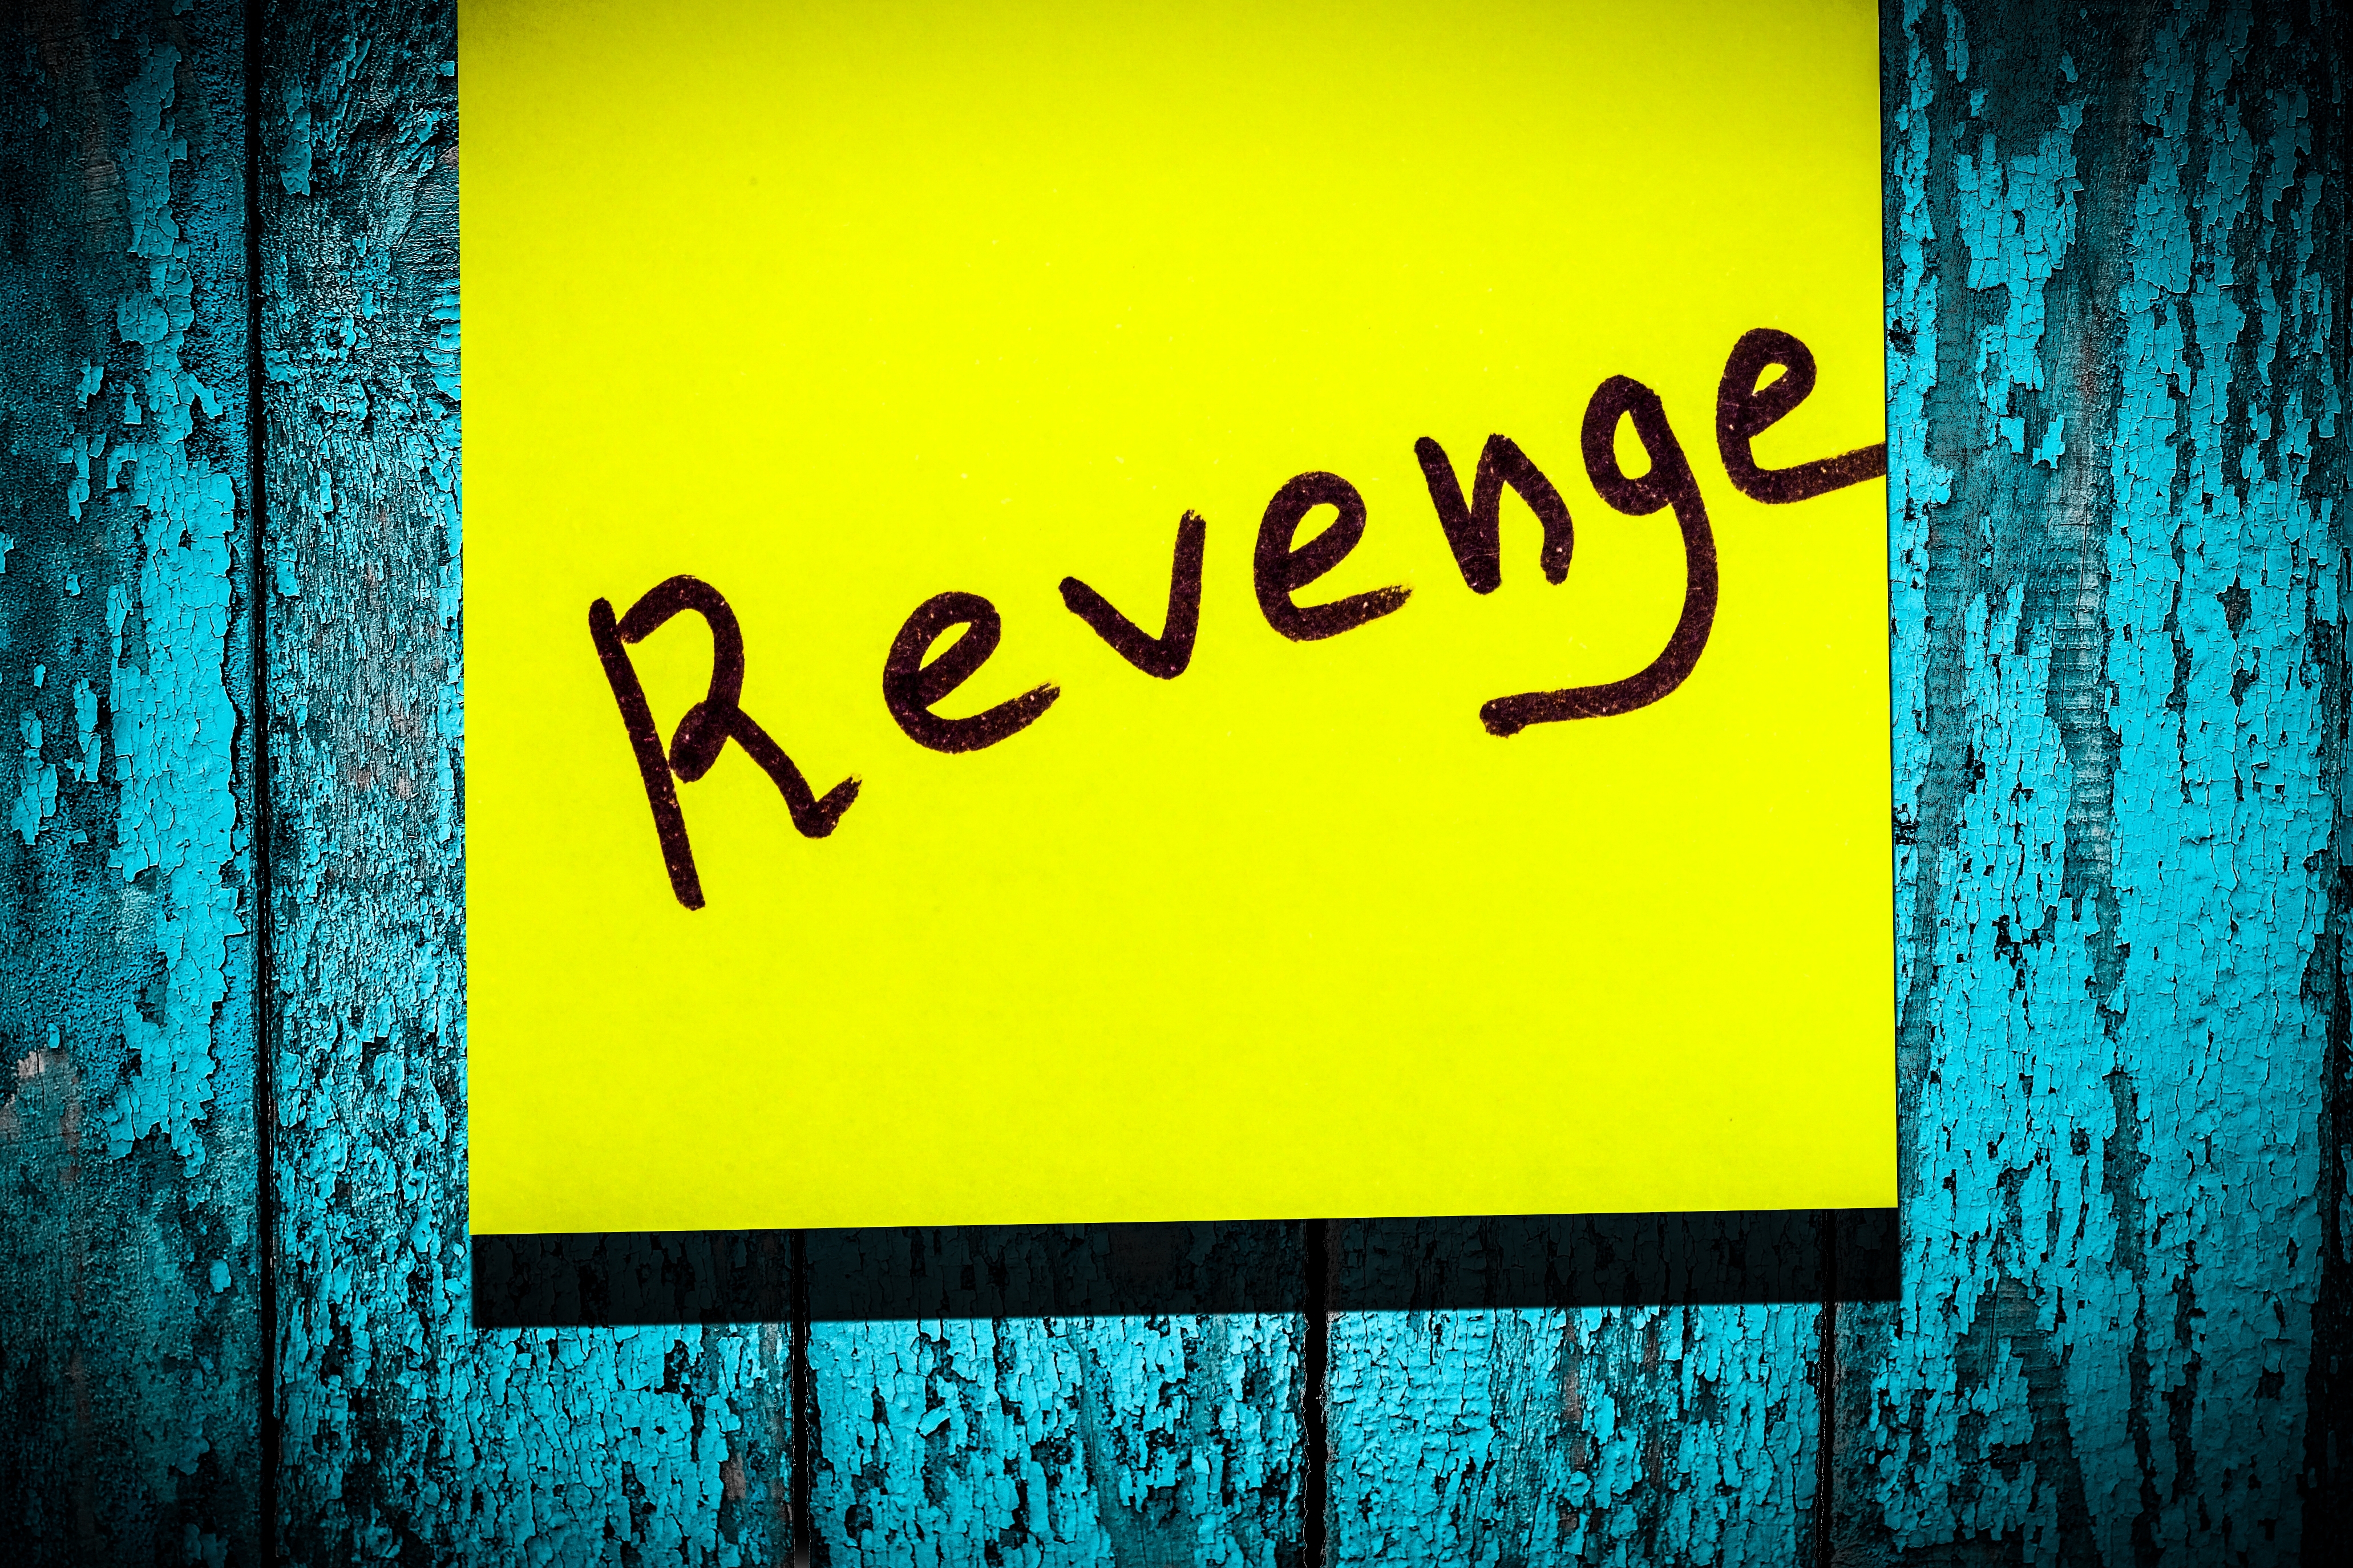 A yellow sticky note with the word "Revenge" | Source: Shutterstock